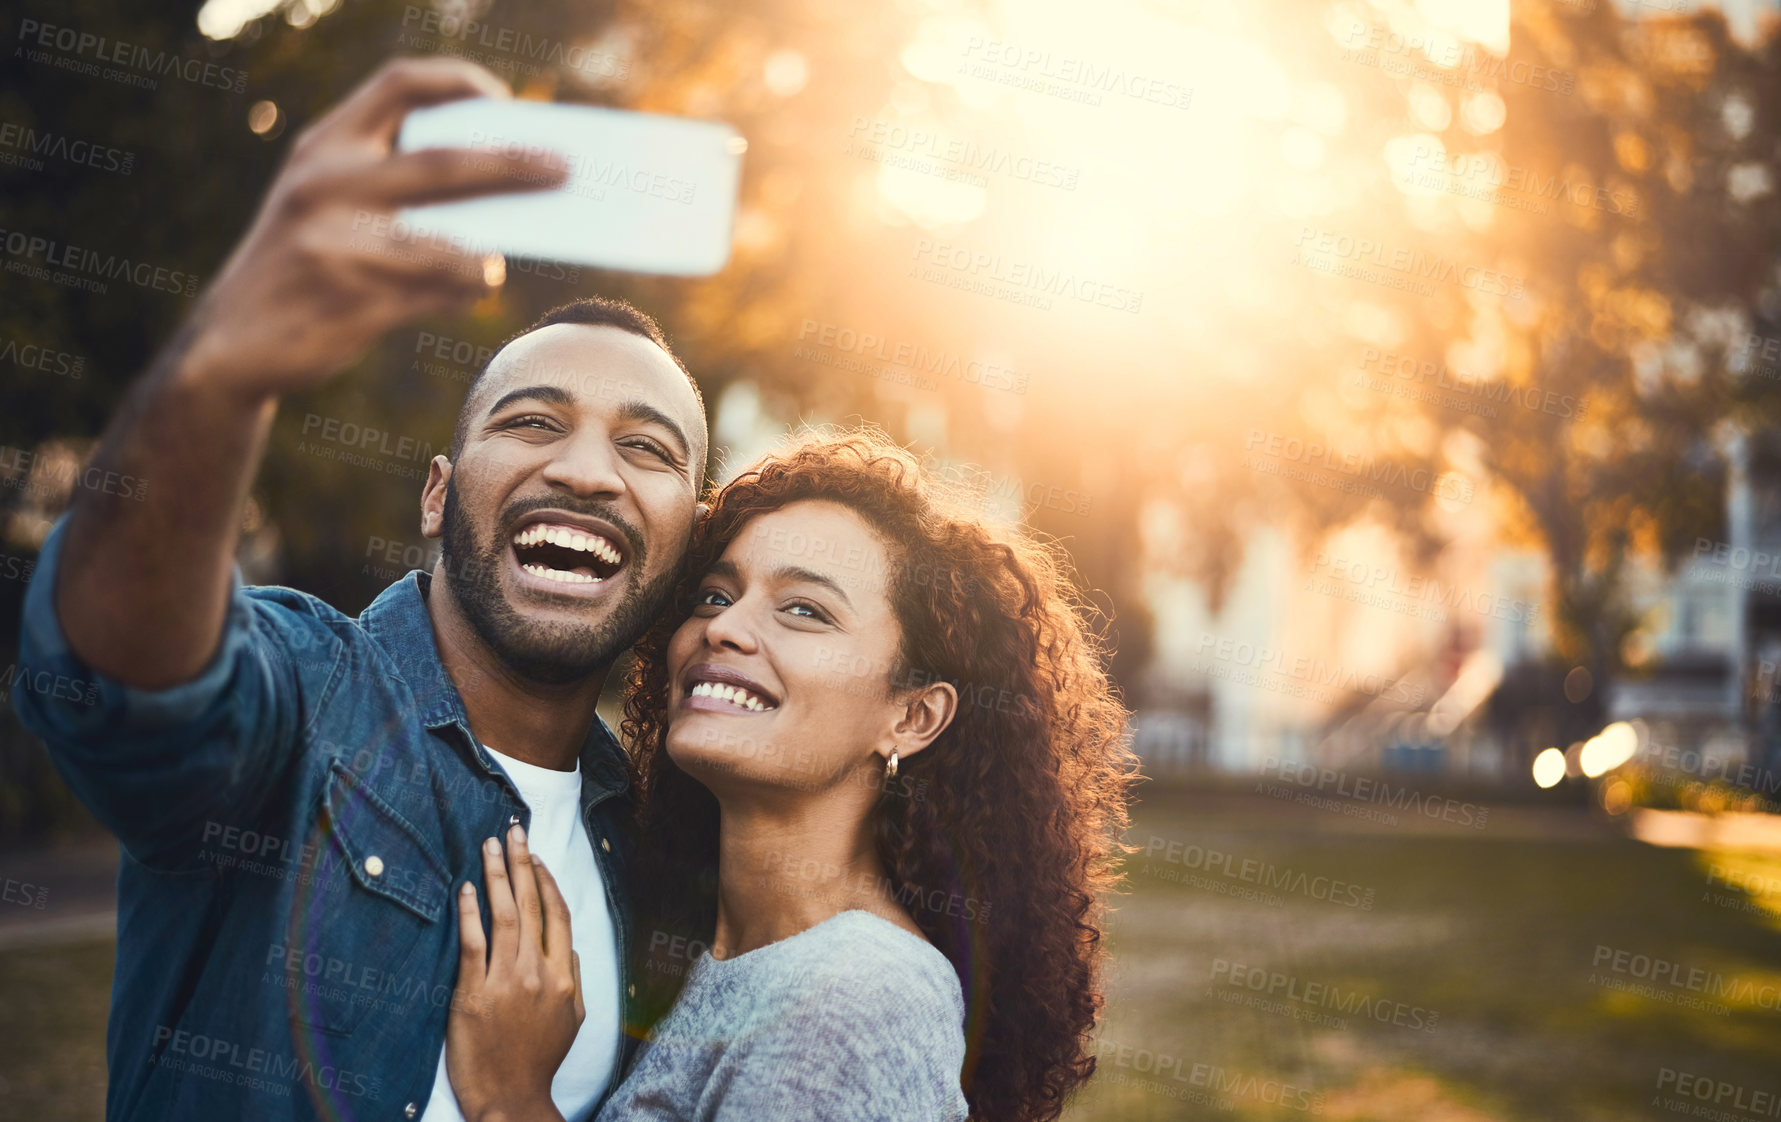 Buy stock photo Shot of a young couple taking selfies together outdoors